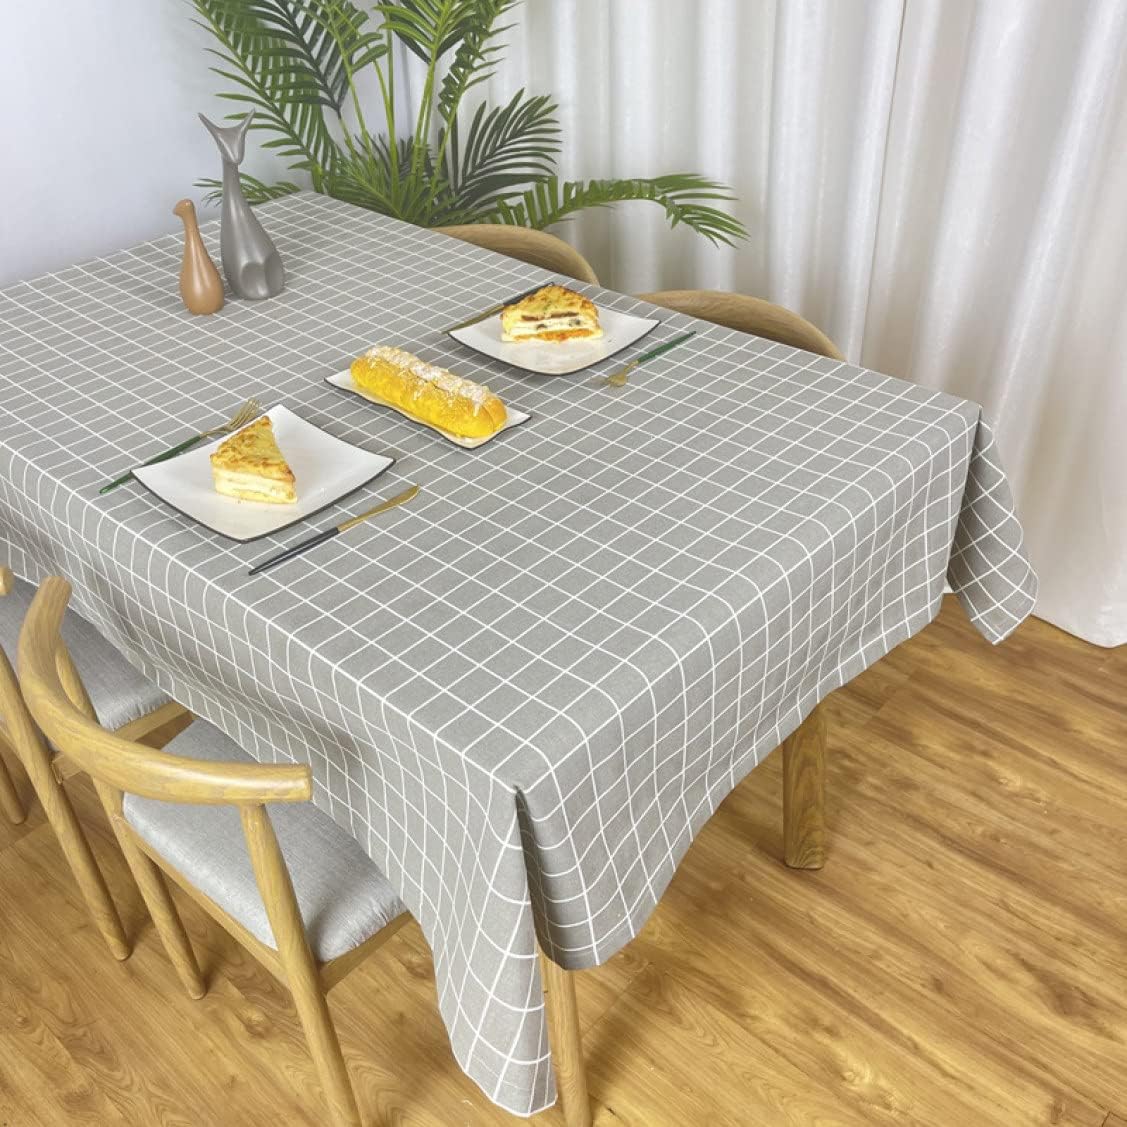 Rustic Plaid Table Cover